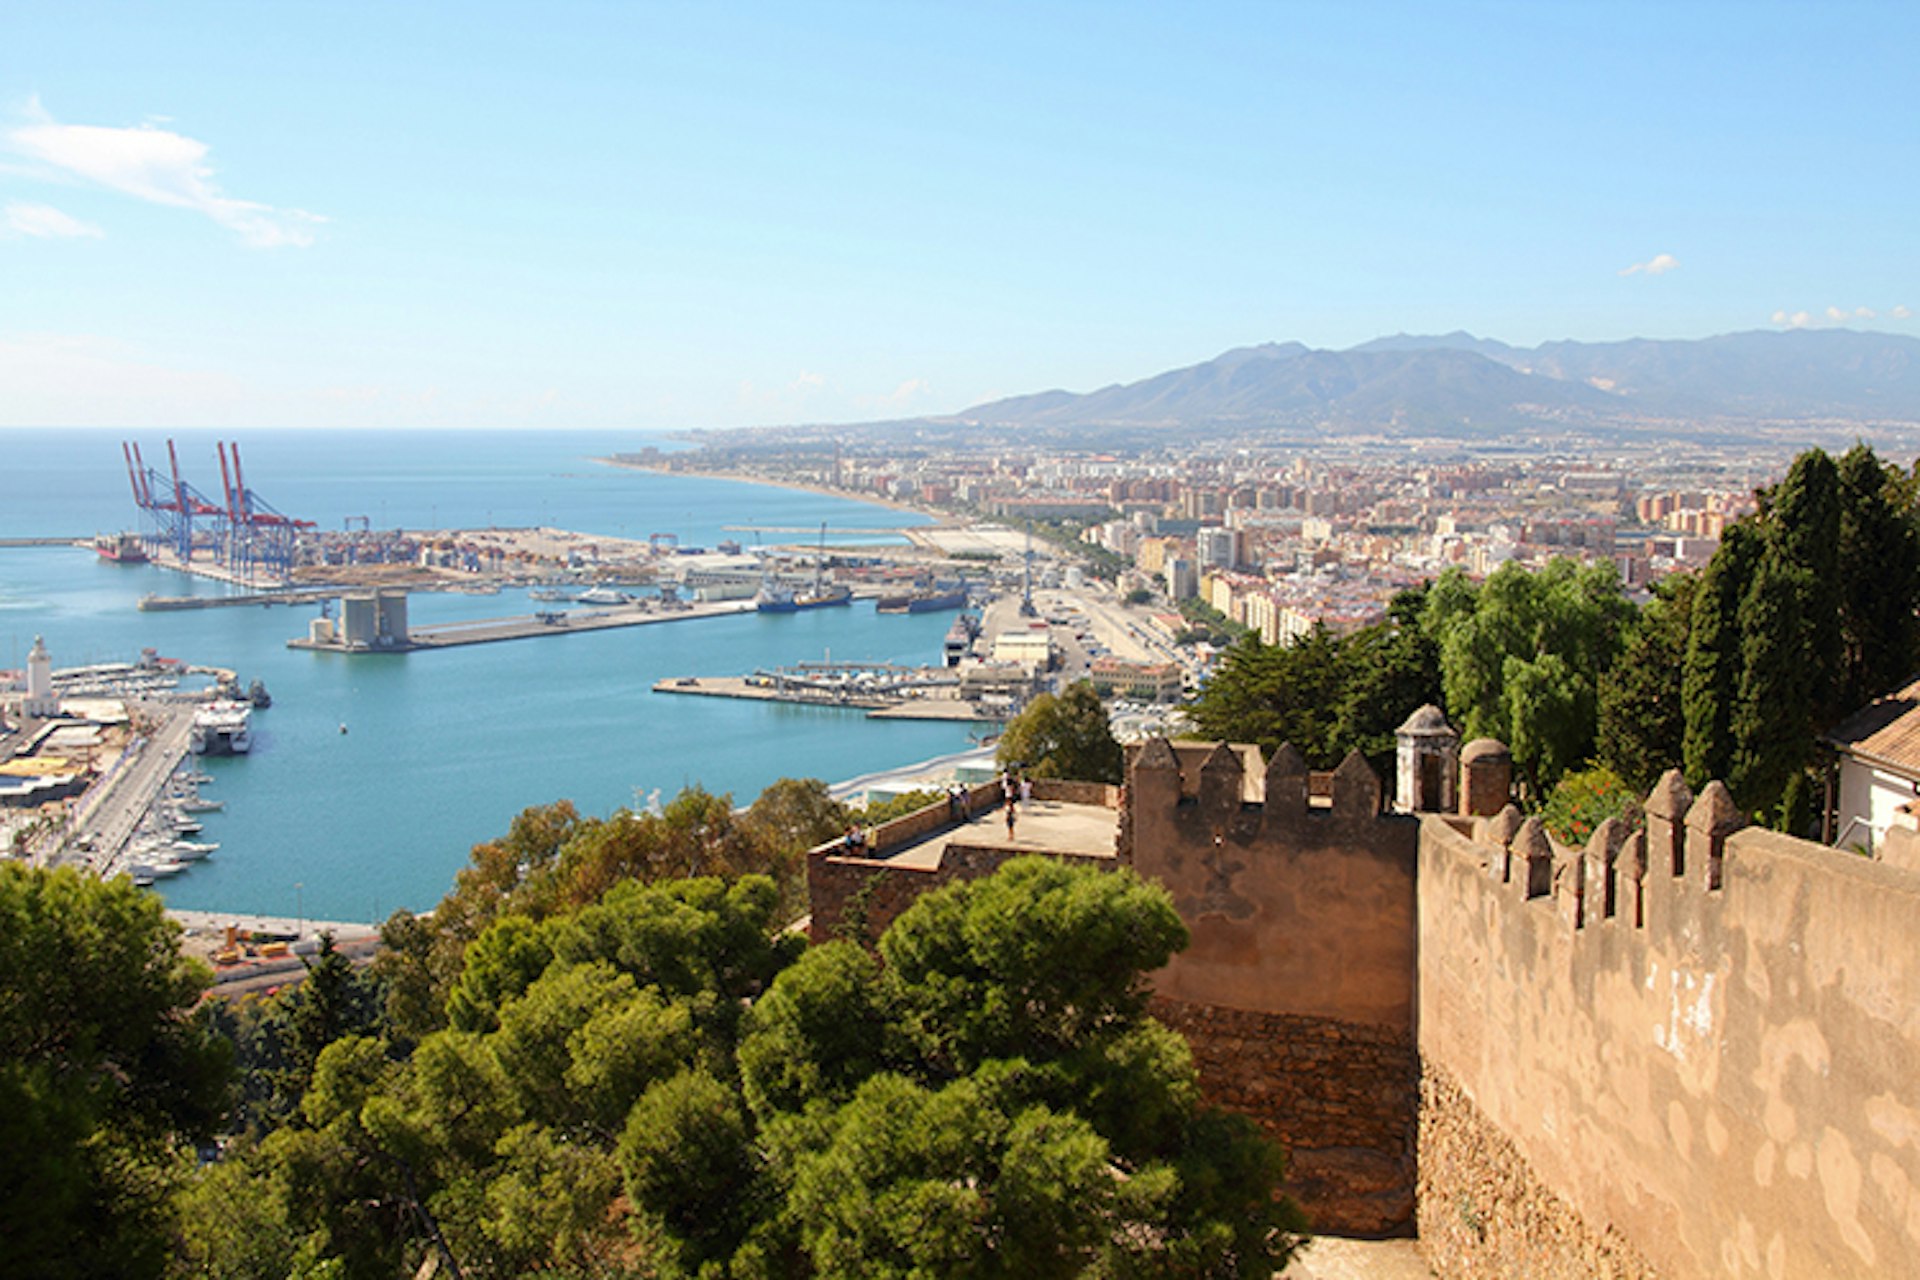 Málaga has added the lure of world-class art to its traditional charms. Image by Tupungato / iStock / Getty Images